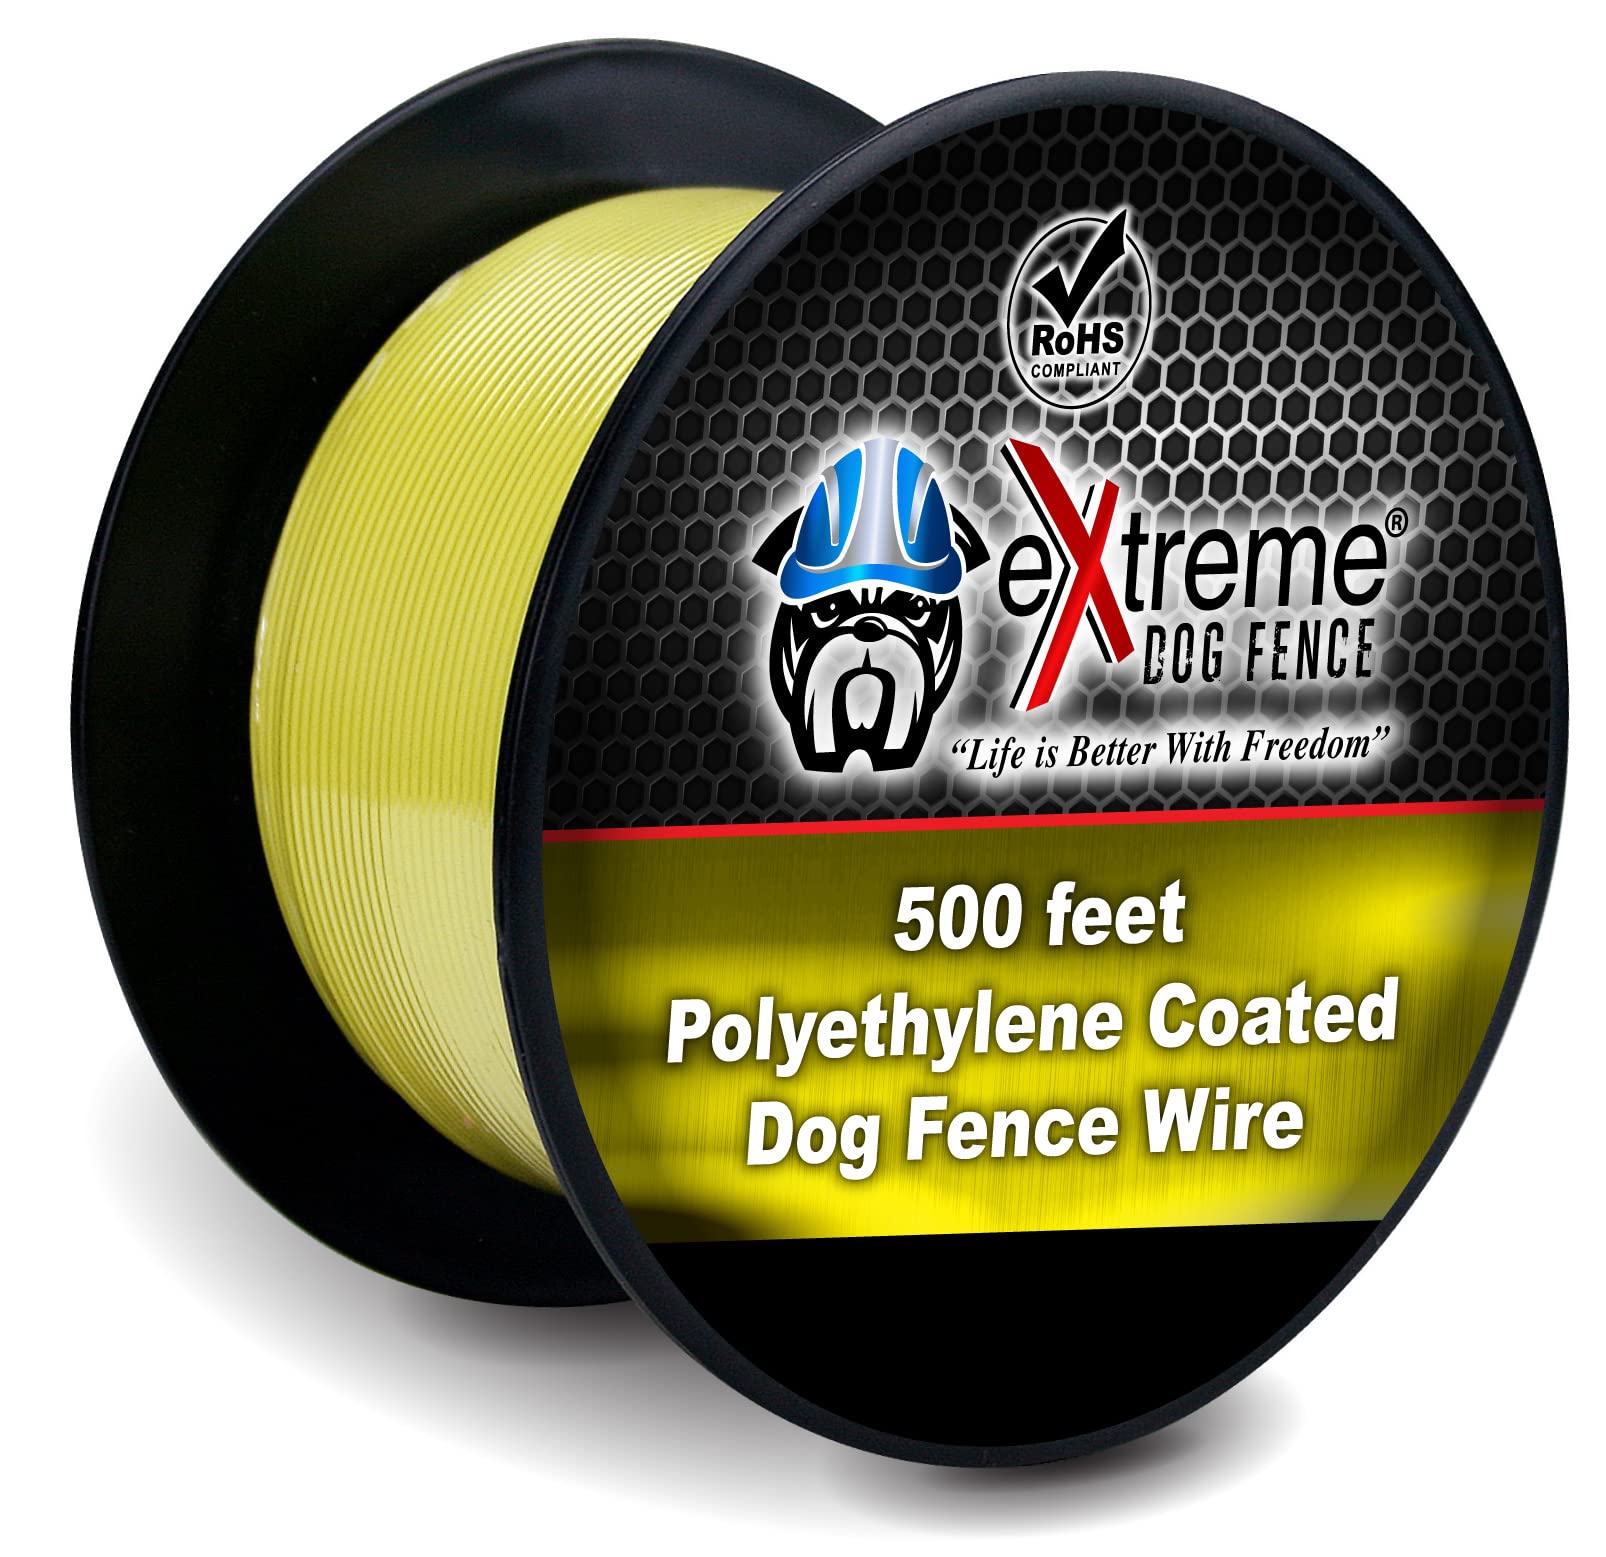 Best USA Dog Fence Wire Compatible with PetSafe, Extreme Dog Fence, and All Other Underground Dog Fences (500 feet) (500 ft)